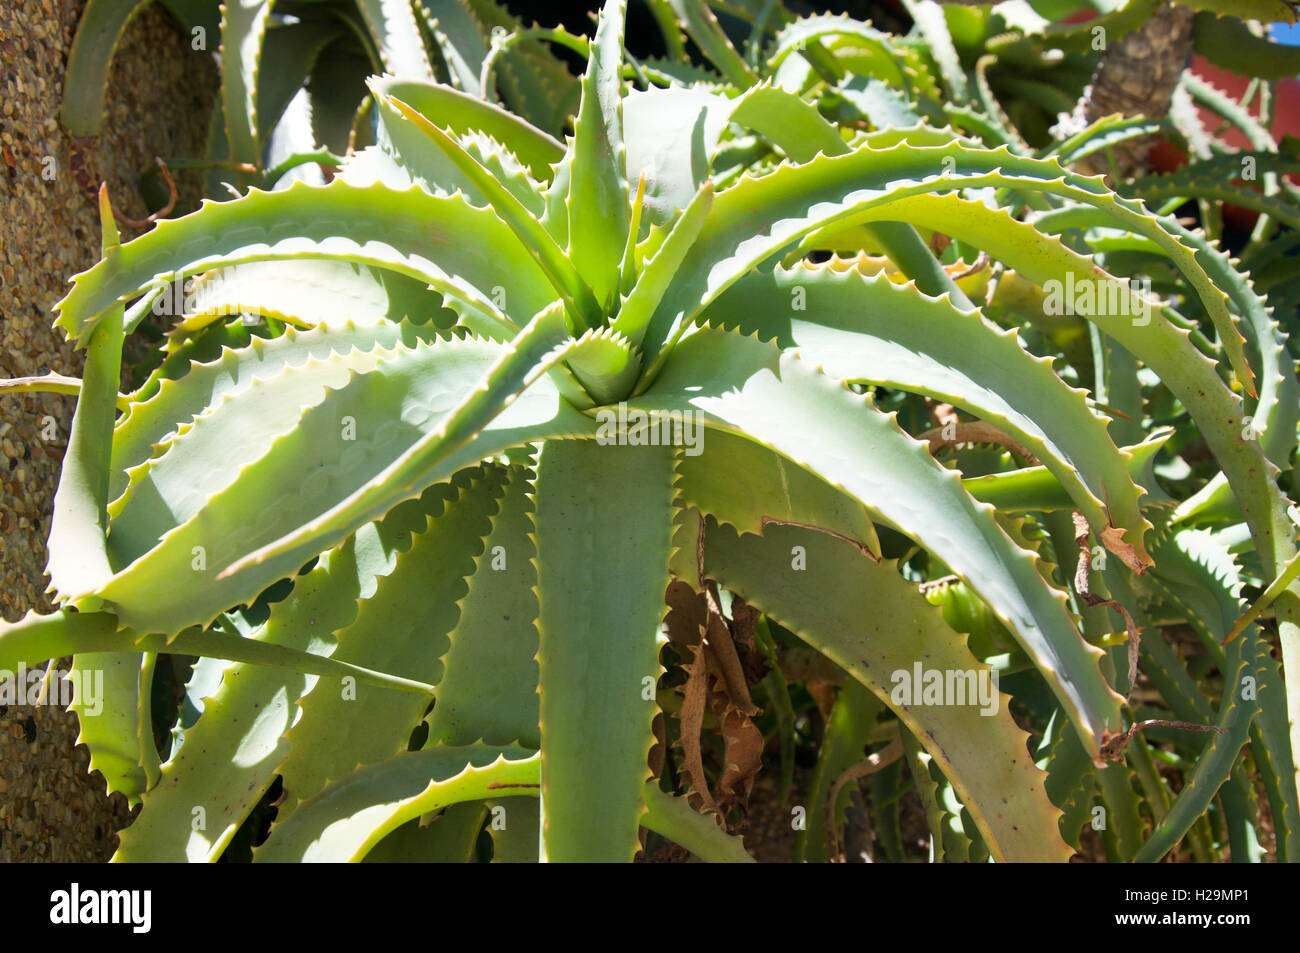 Large Wild Green Aloe Vera Plant With Spiky Fleshy Leaves